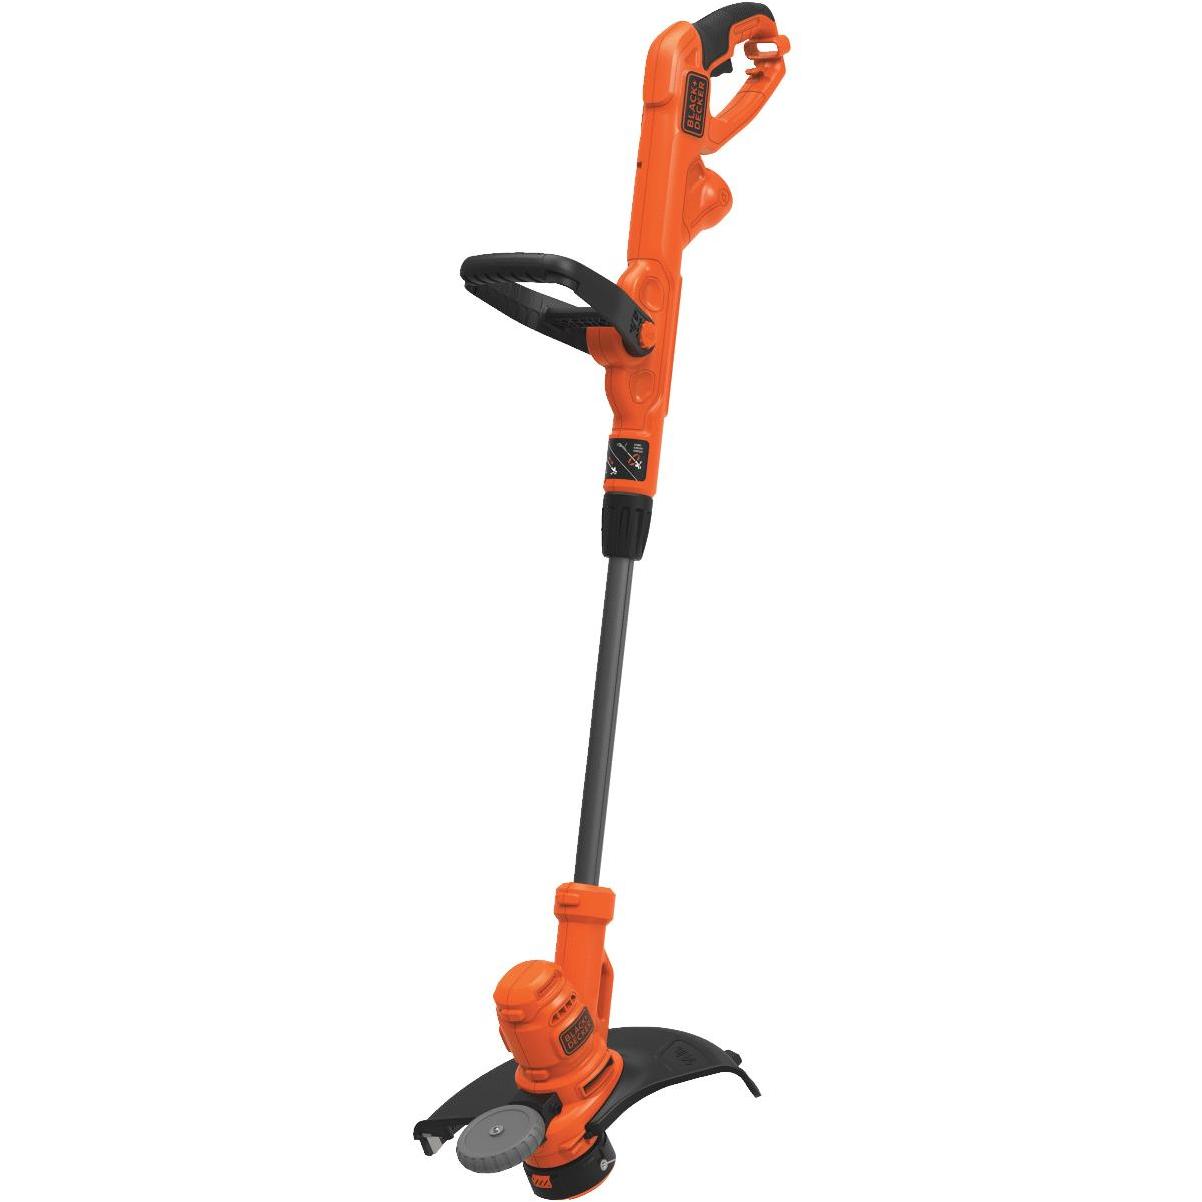 NEW Black & Decker RS-136 Bump Feed String Trimmer Spool w/ 20 Ft .065 Line